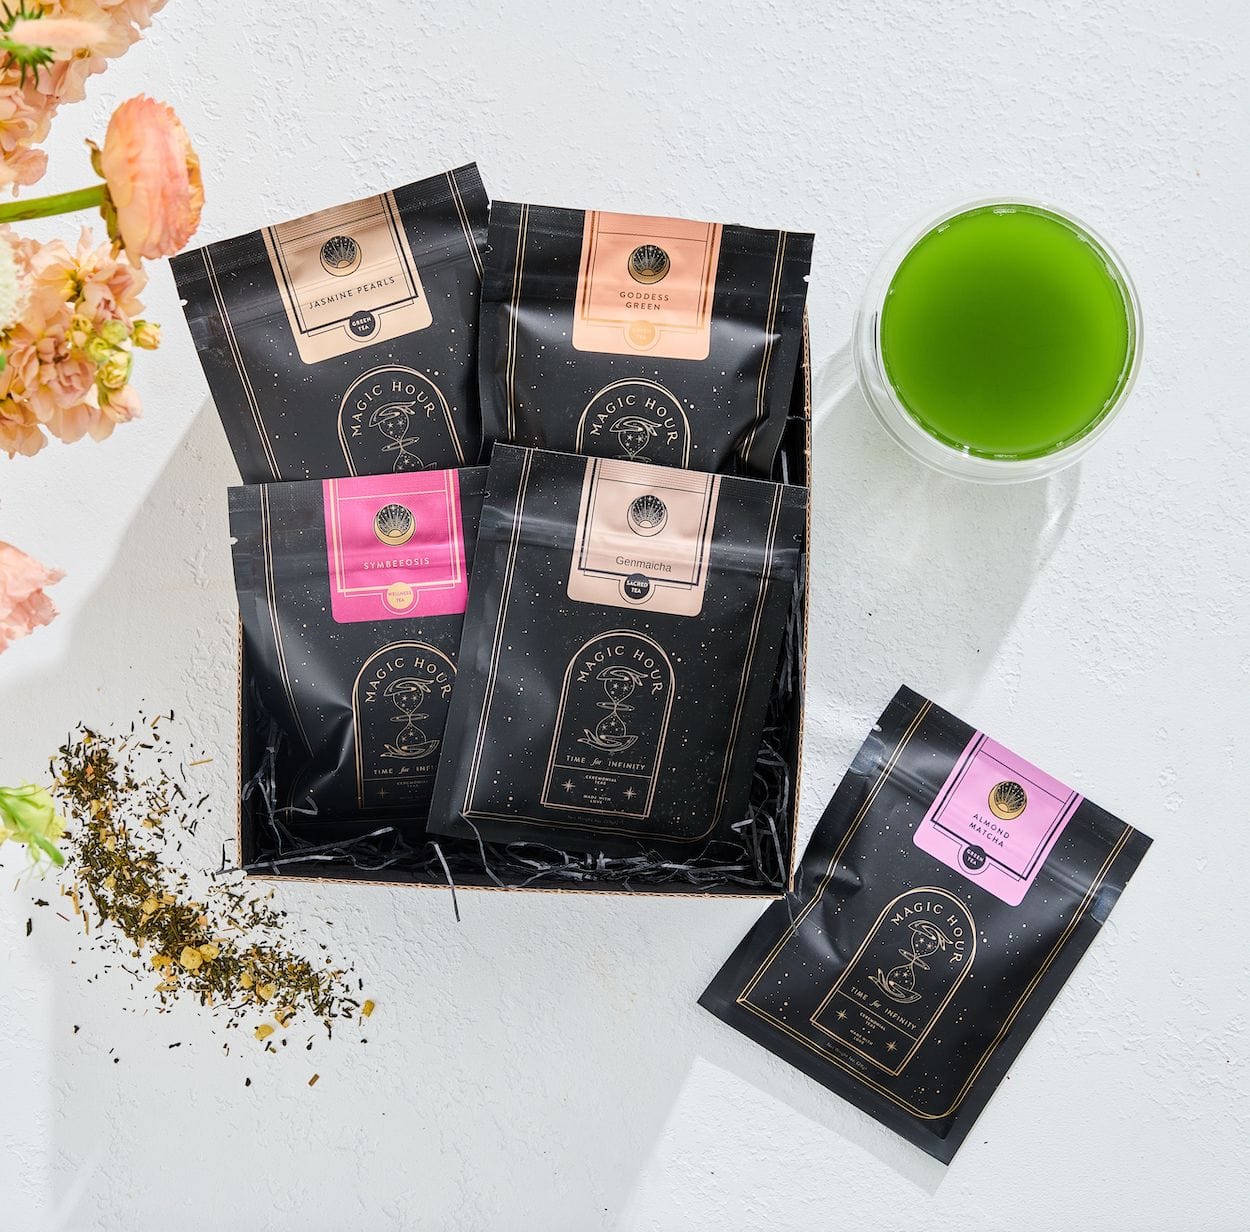 A display of five black packets of Green Magic Sampler Box from "Magic Hour" in various flavors, laid out on a white surface alongside a glass of vibrant green tea. Some loose leaf tea is scattered near the packets, and a bouquet of peach-colored flowers is partially visible.